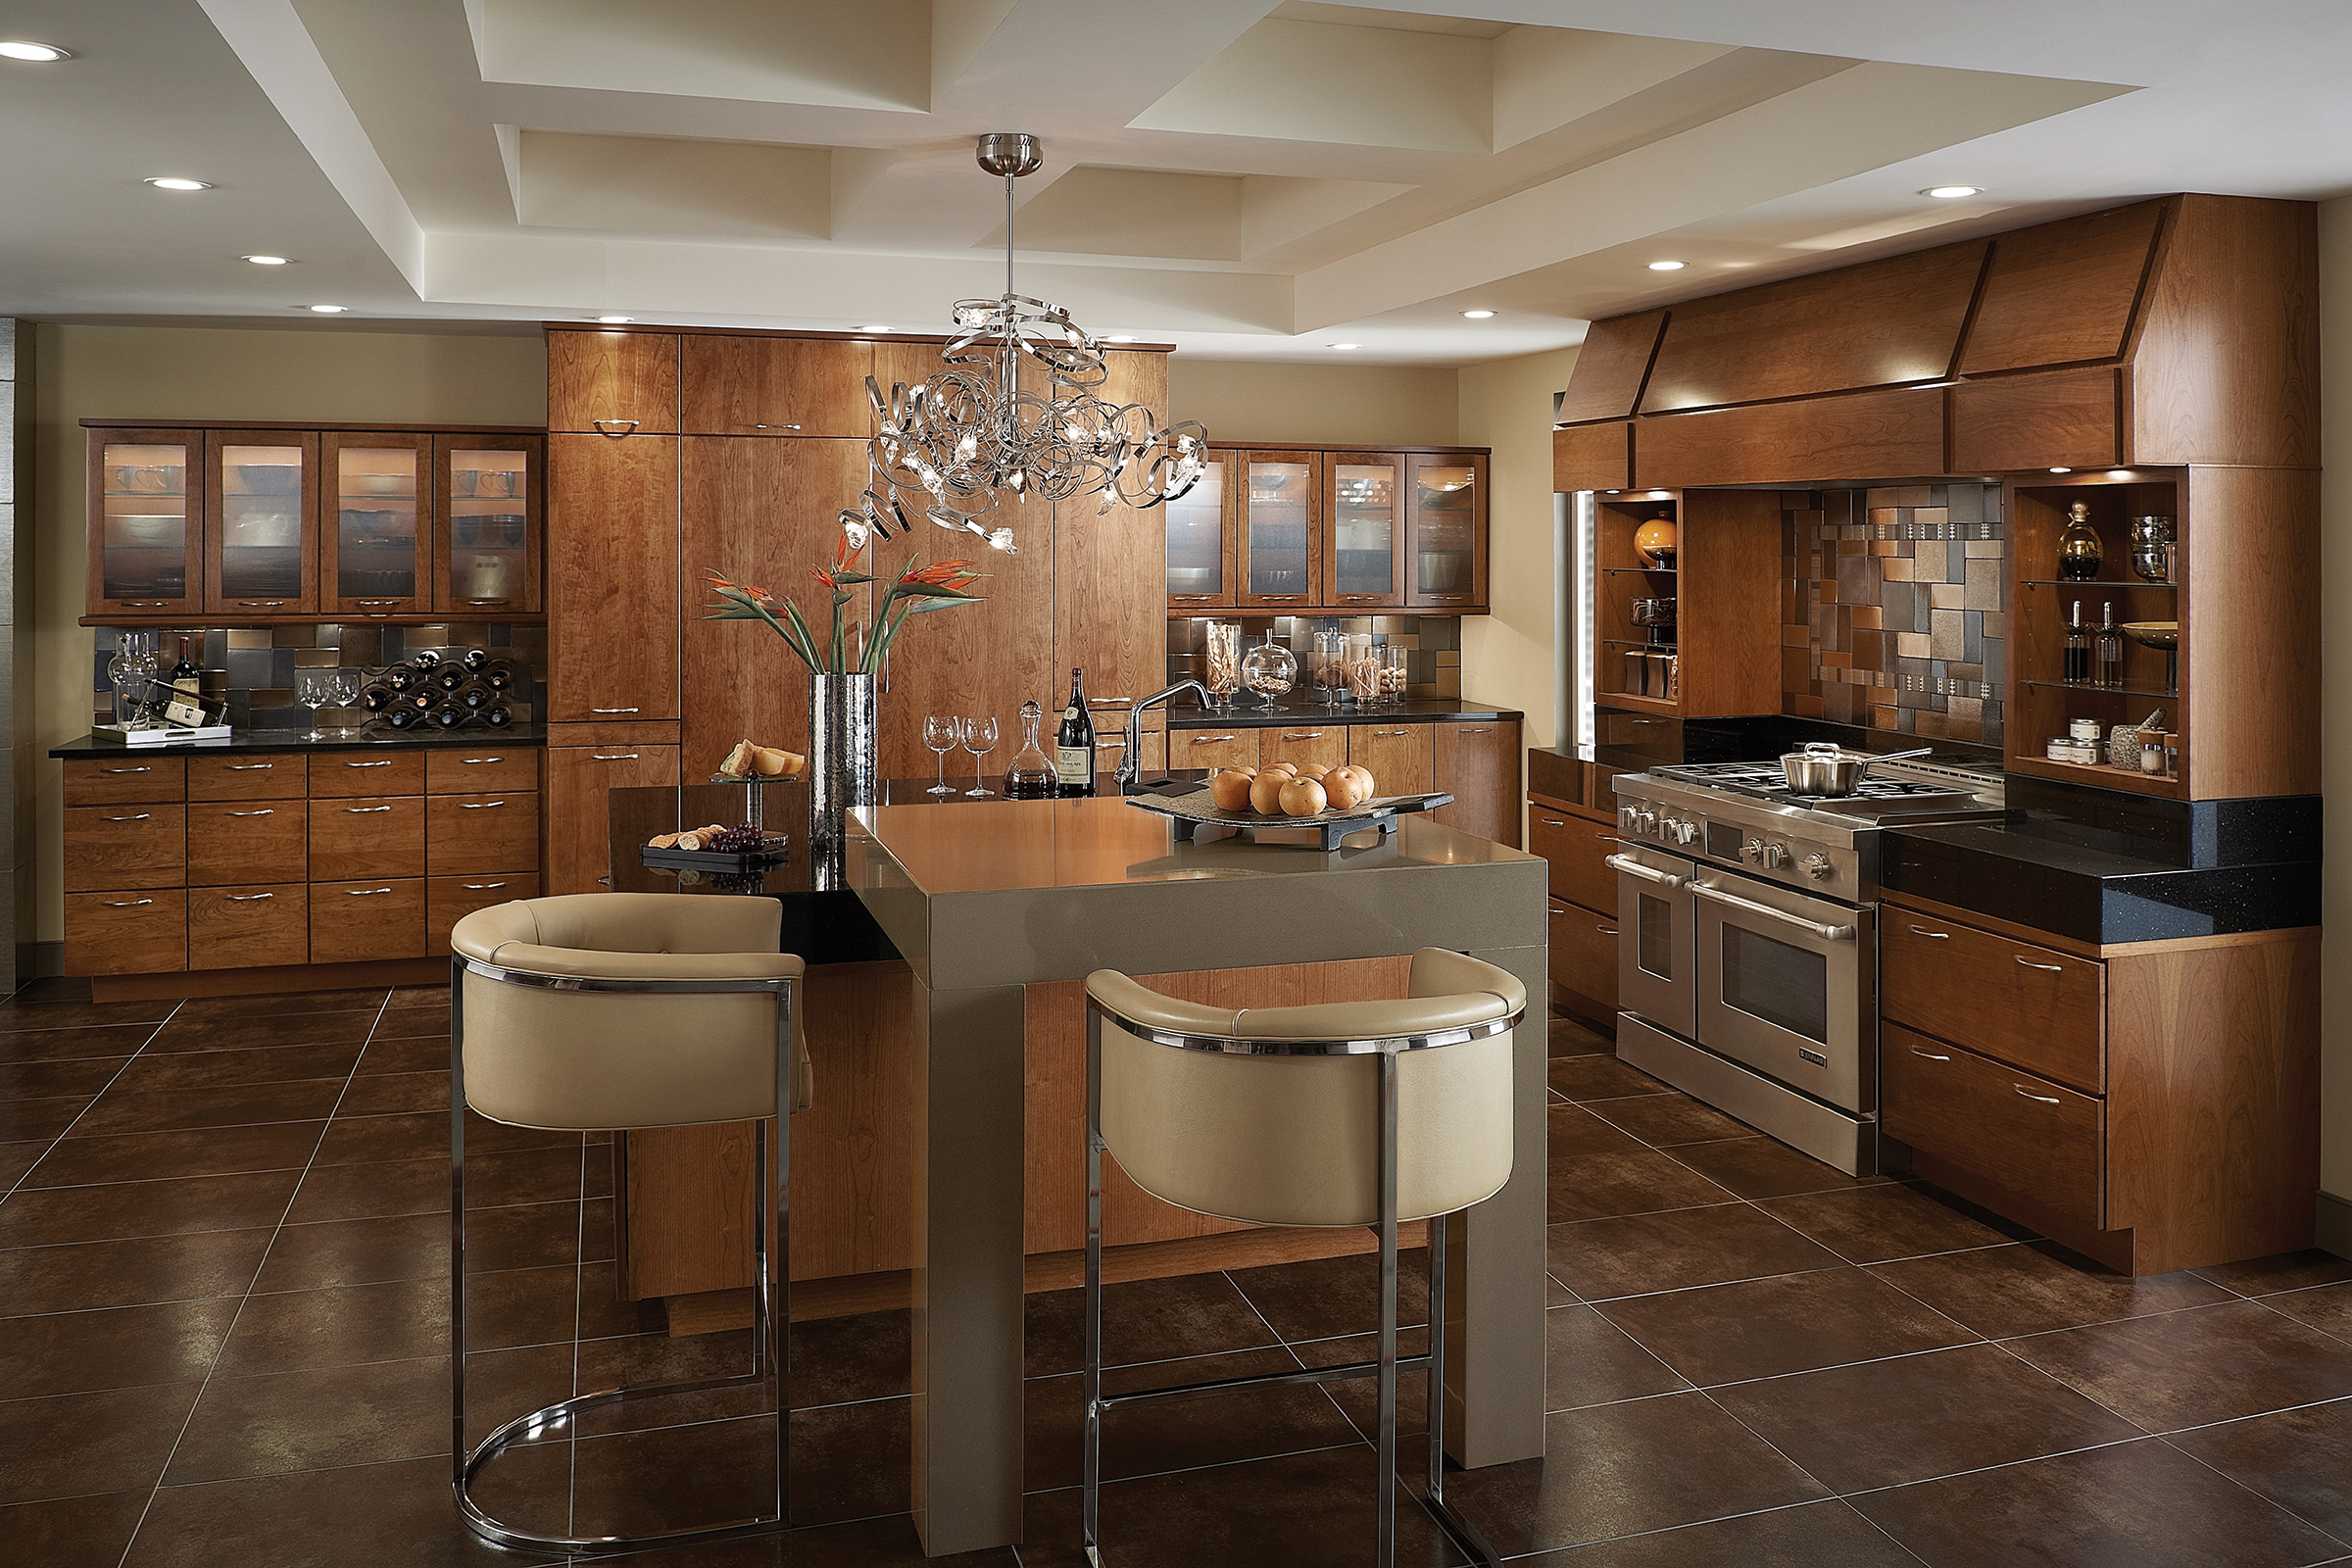 Midcentury Modern design with KraftMaid Cherry wood kitchen cabinets finished in mid-tone Sunset stain